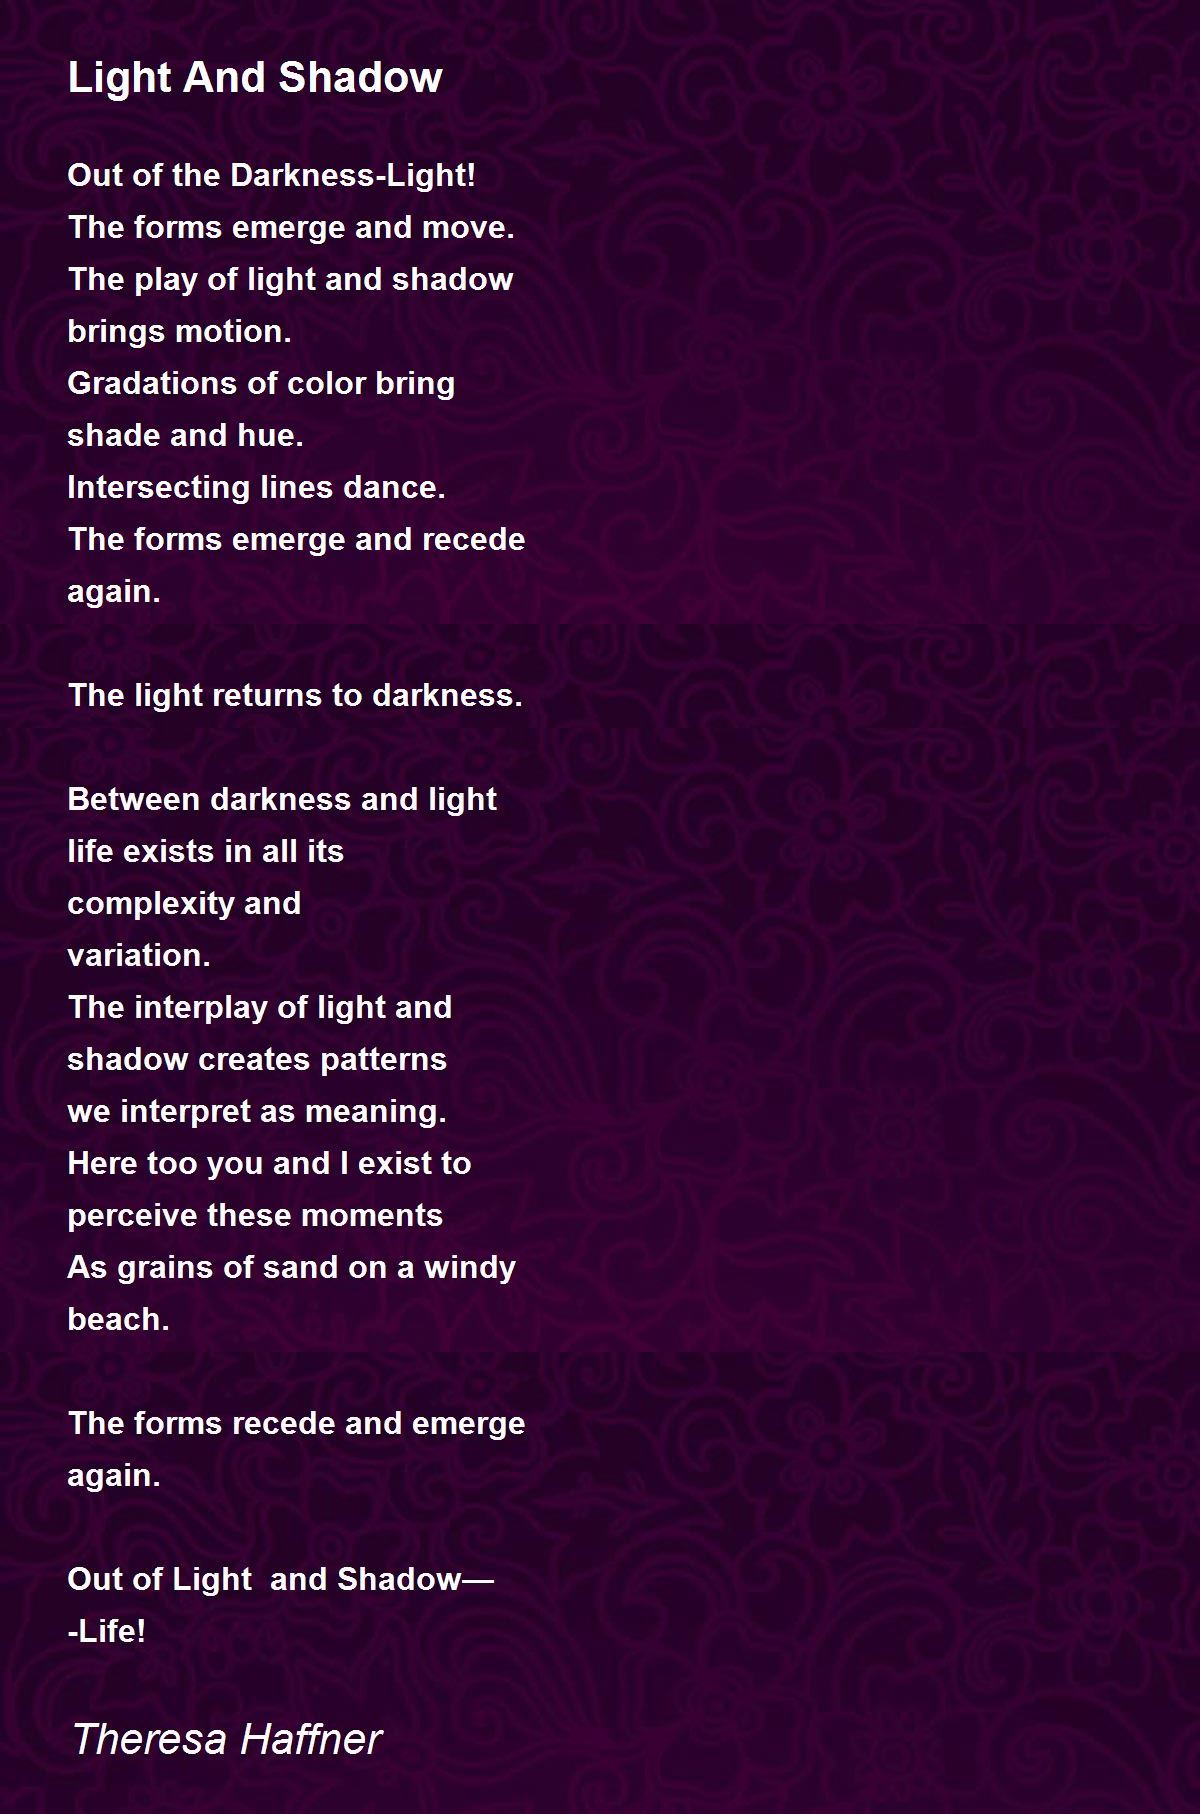 Light And Shadow Poem By Theresa Haffner